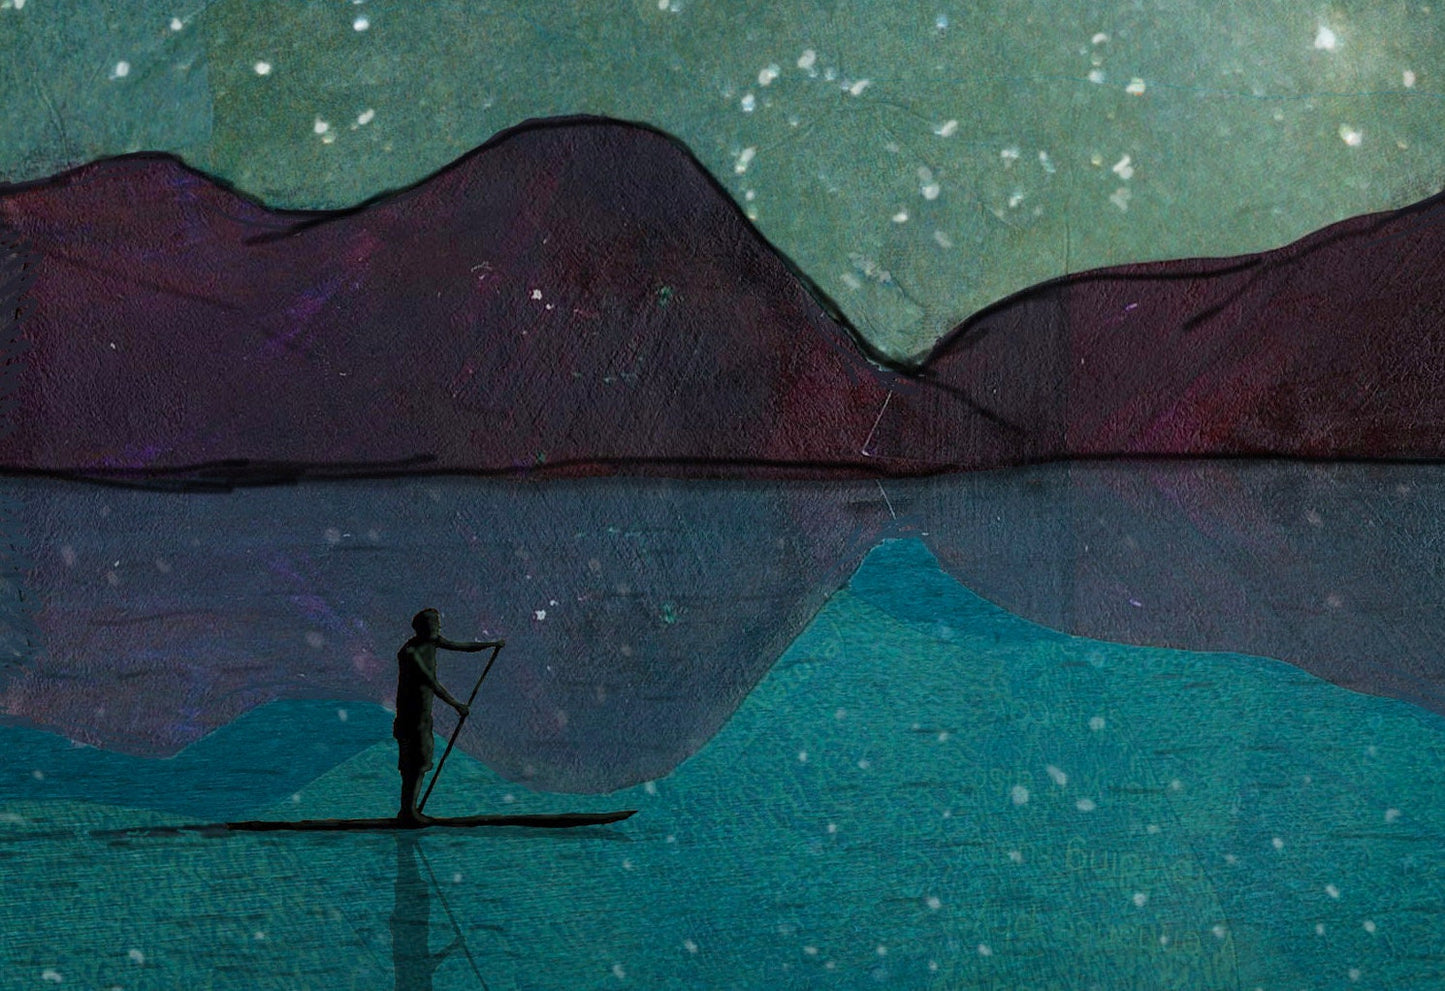 8x10 Art print of a Paper Collage of a person stand up paddling on a lake under the night sky stars - inspirational - Wall Art